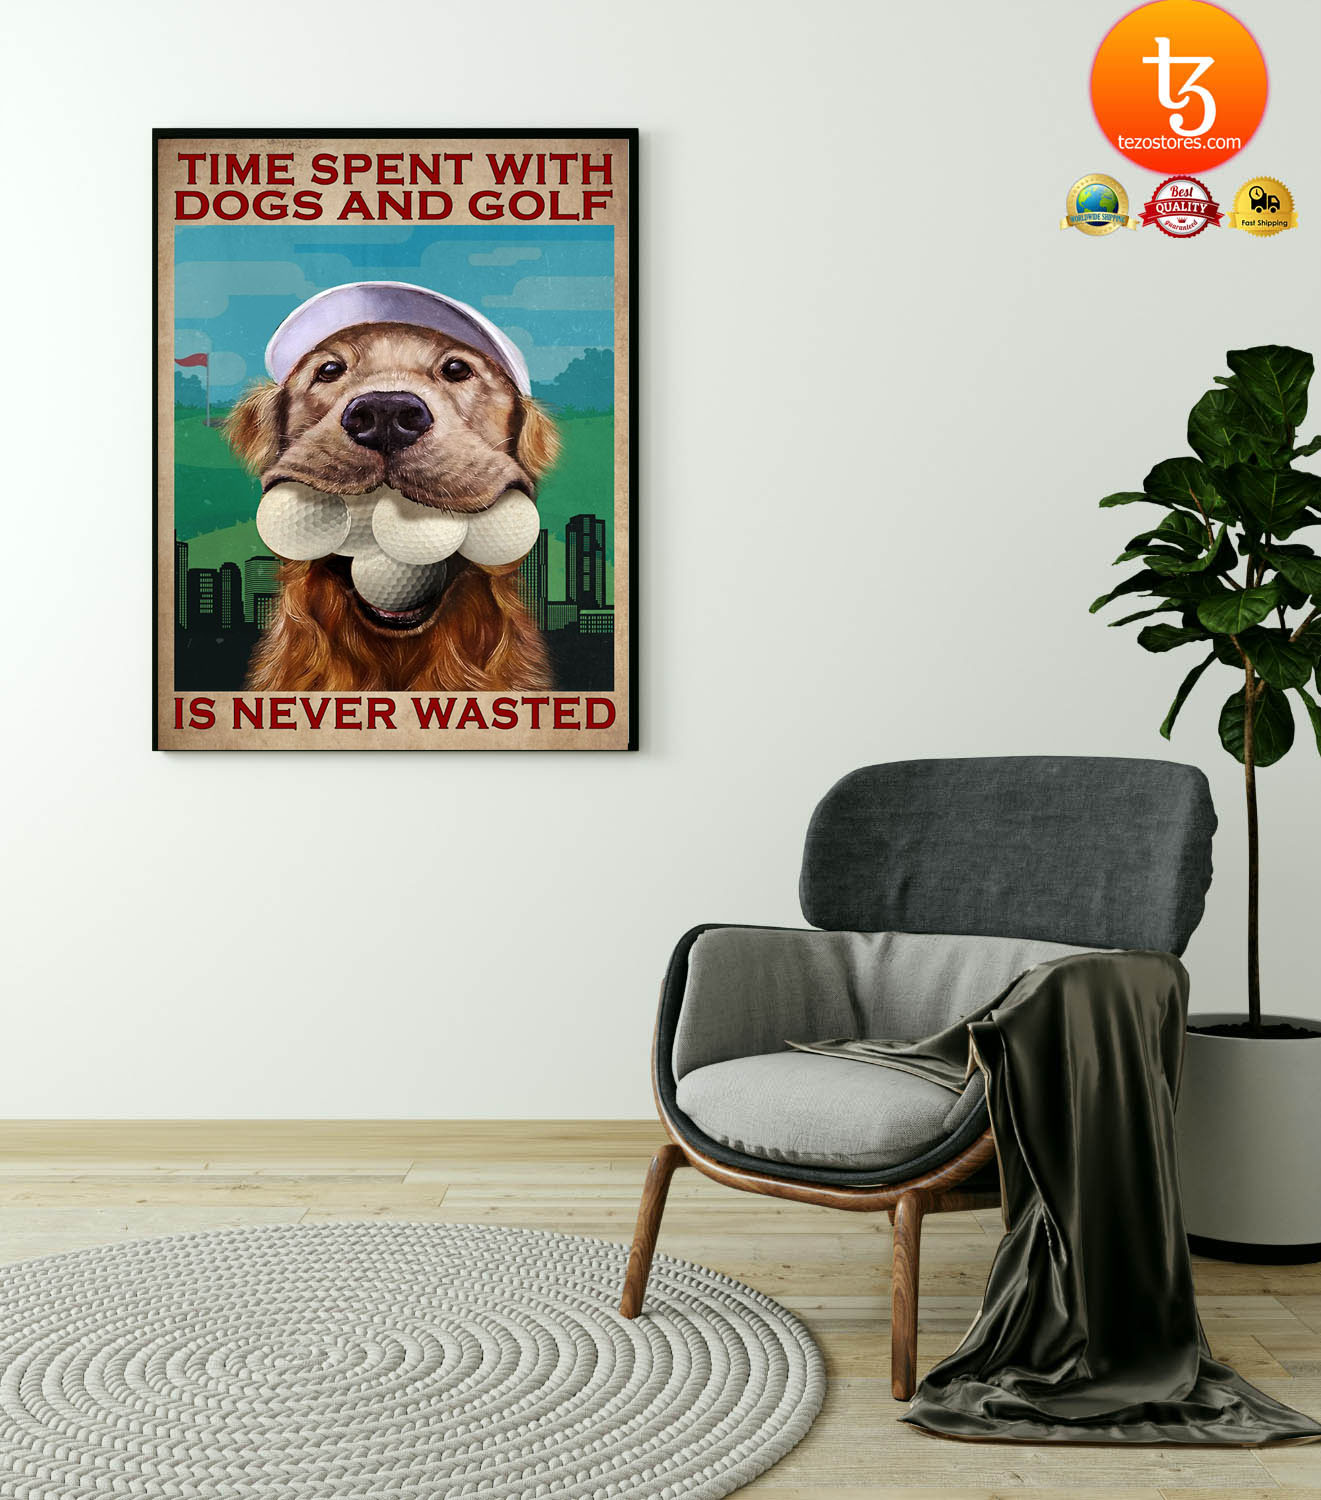 Time spent with dogs and golf is never wasted poster6